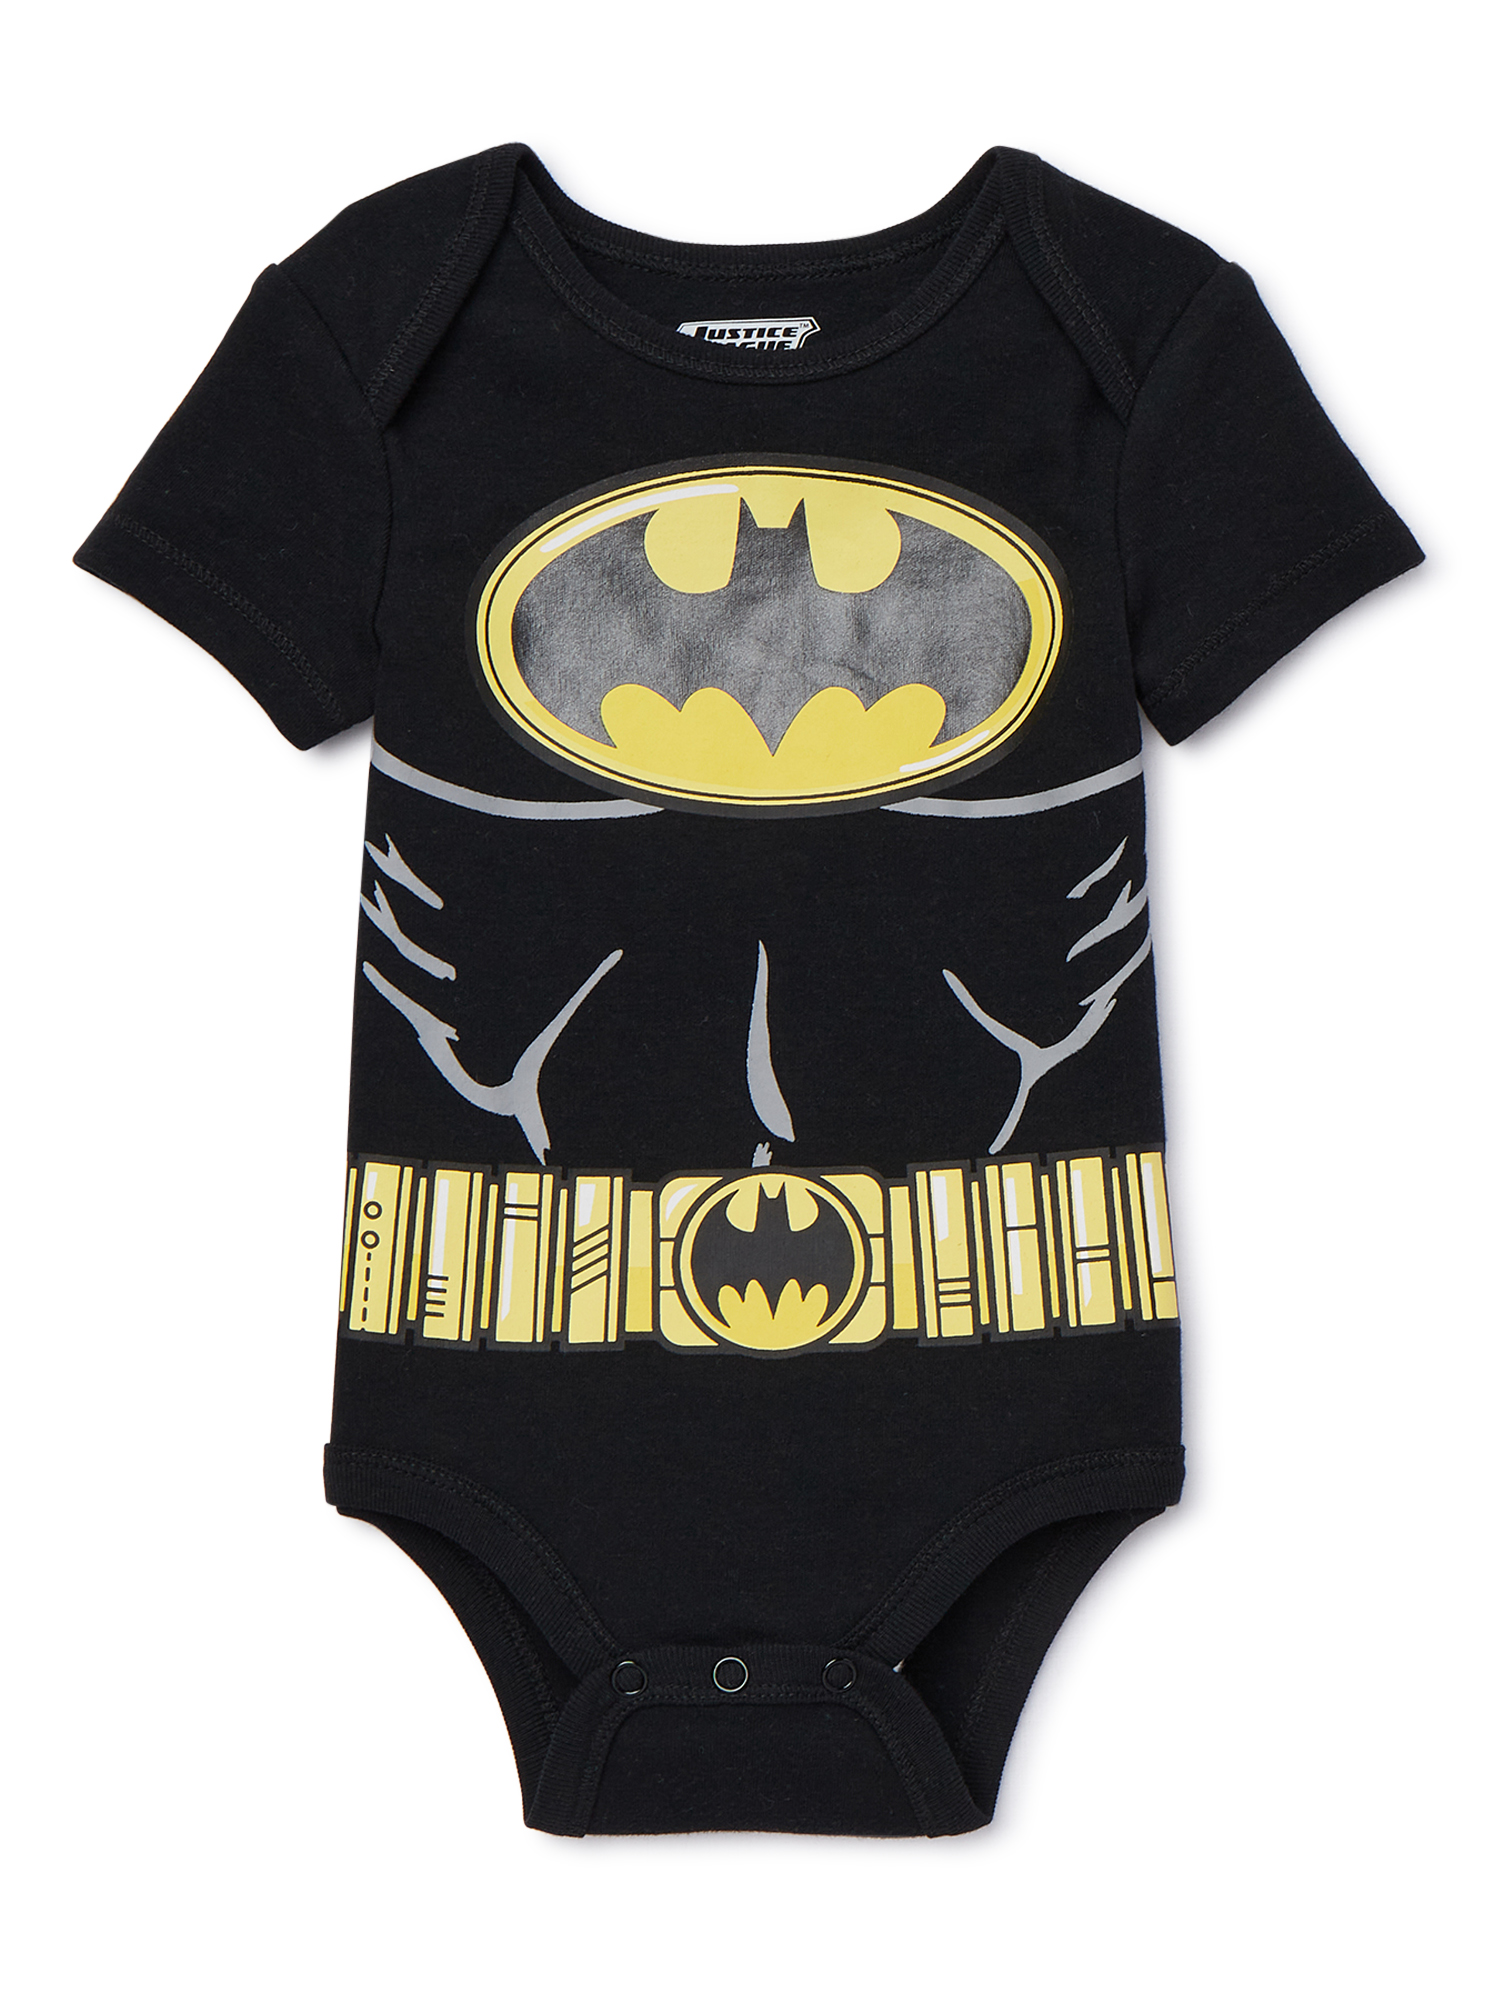 Justice League Baby Boy Short Sleeve Bodysuits, 3-Pack - image 2 of 7